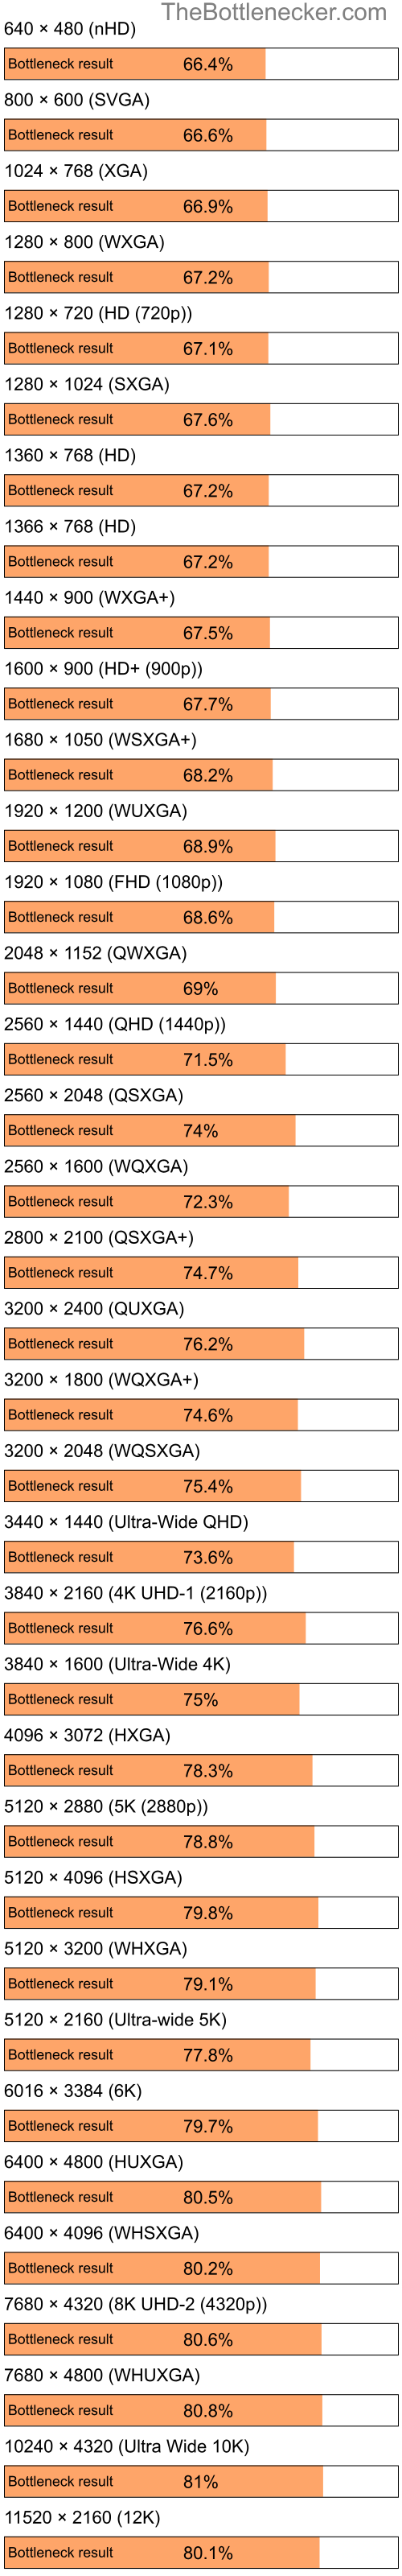 Bottleneck results by resolution for Intel Pentium 4 and AMD Radeon X1650 Pro in General Tasks